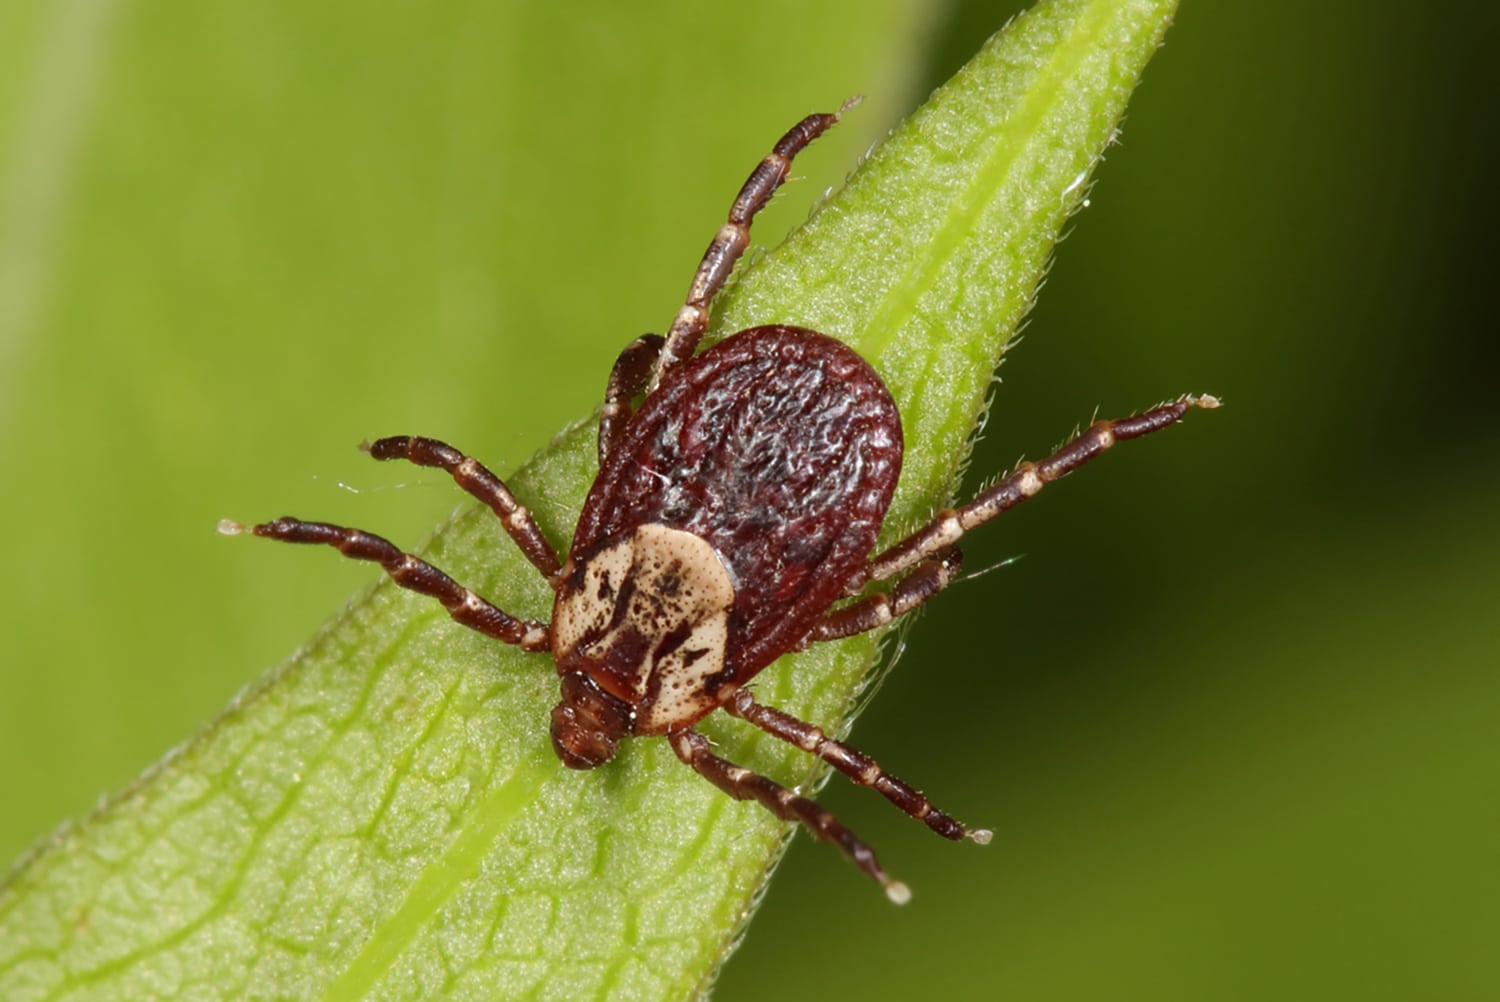 horizontal photo of an american dog tick on a leaf, with an out of focus green background Image credit: Tom Murray on Flickr